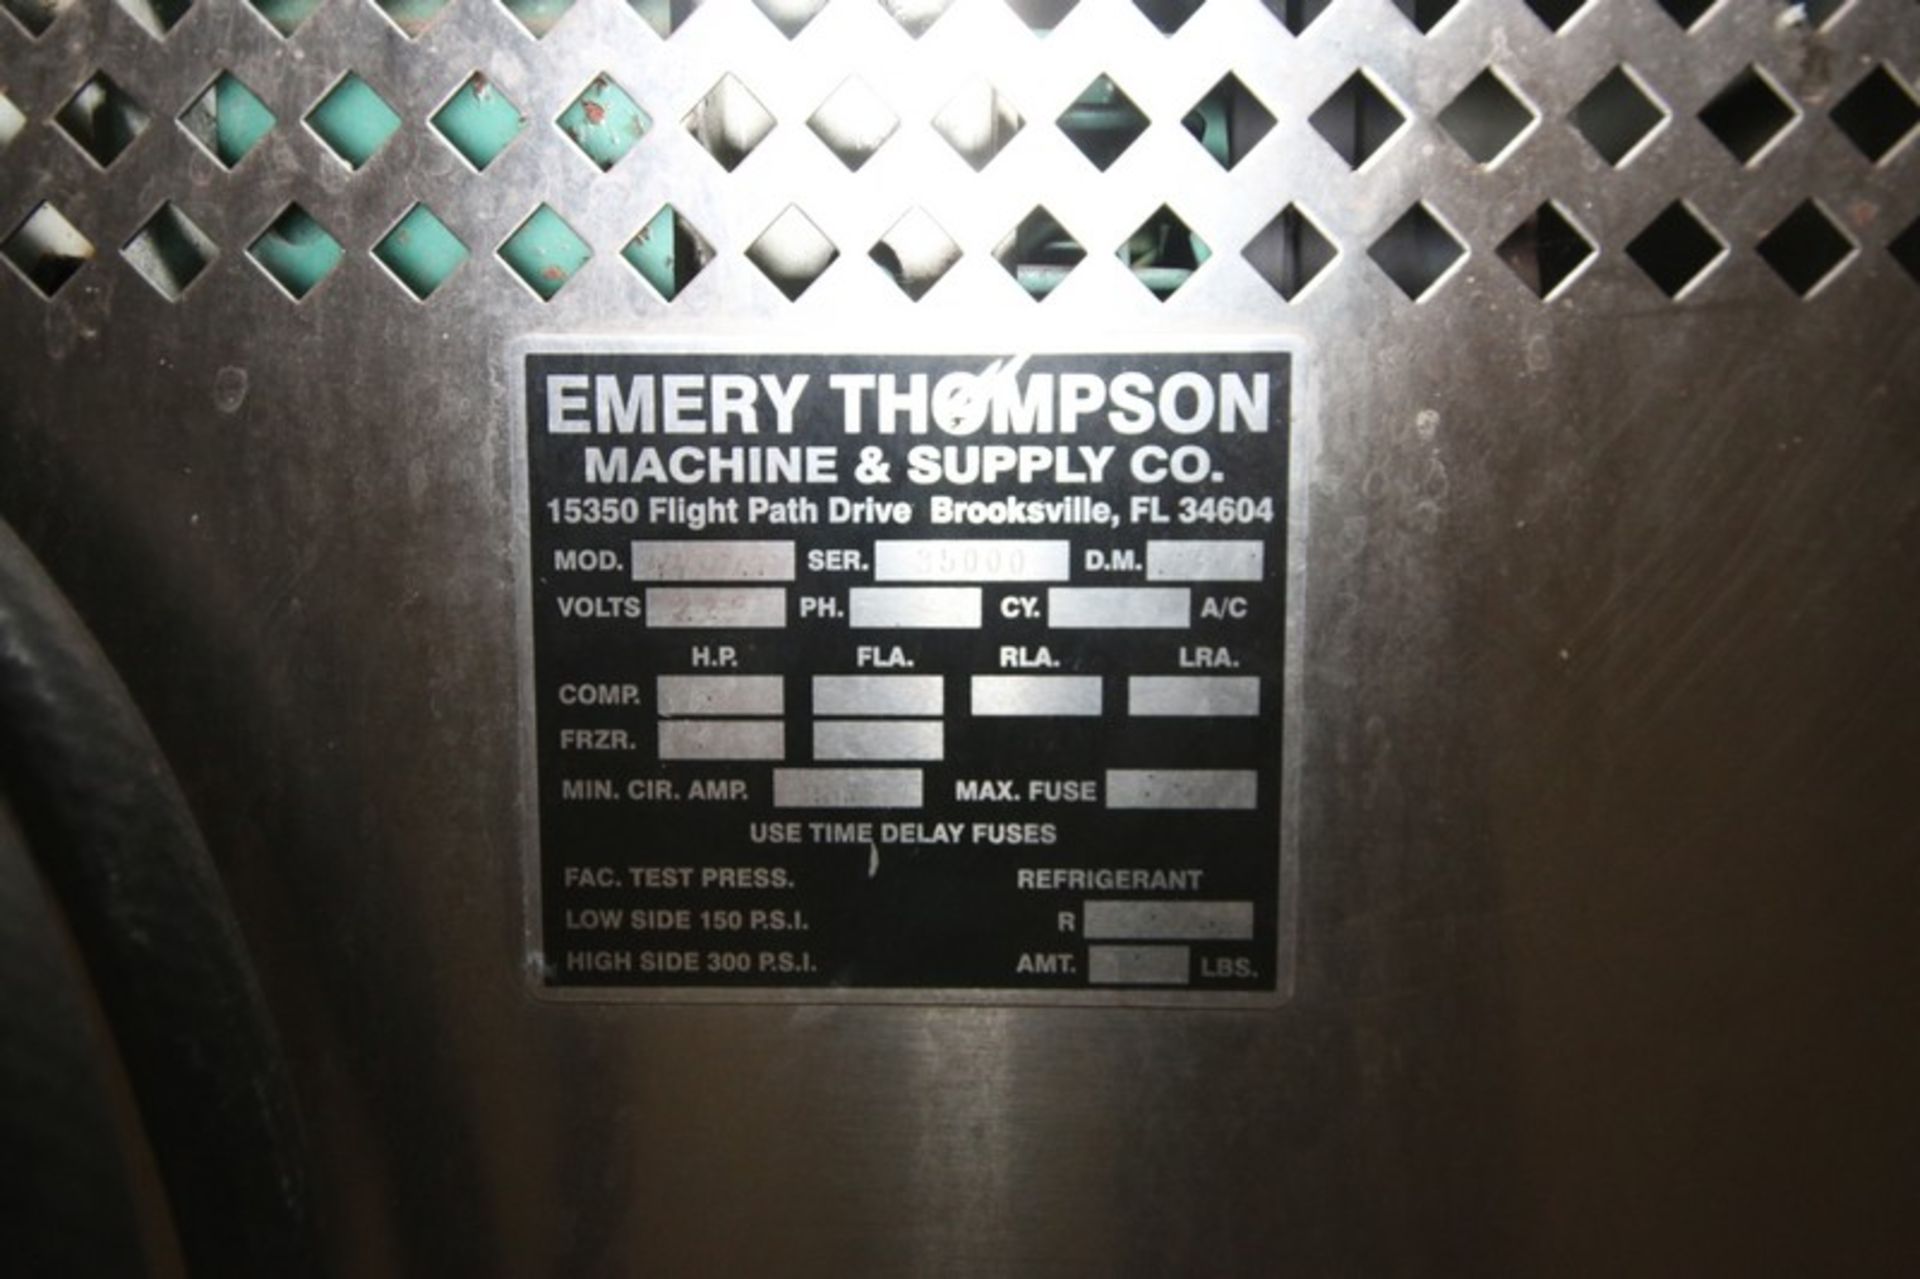 Energy Thompson S/S Ice Cream Freezer, M/N 309, S/N 3500, 280/230 Volts, 3 Phase, Mounted on - Image 8 of 8